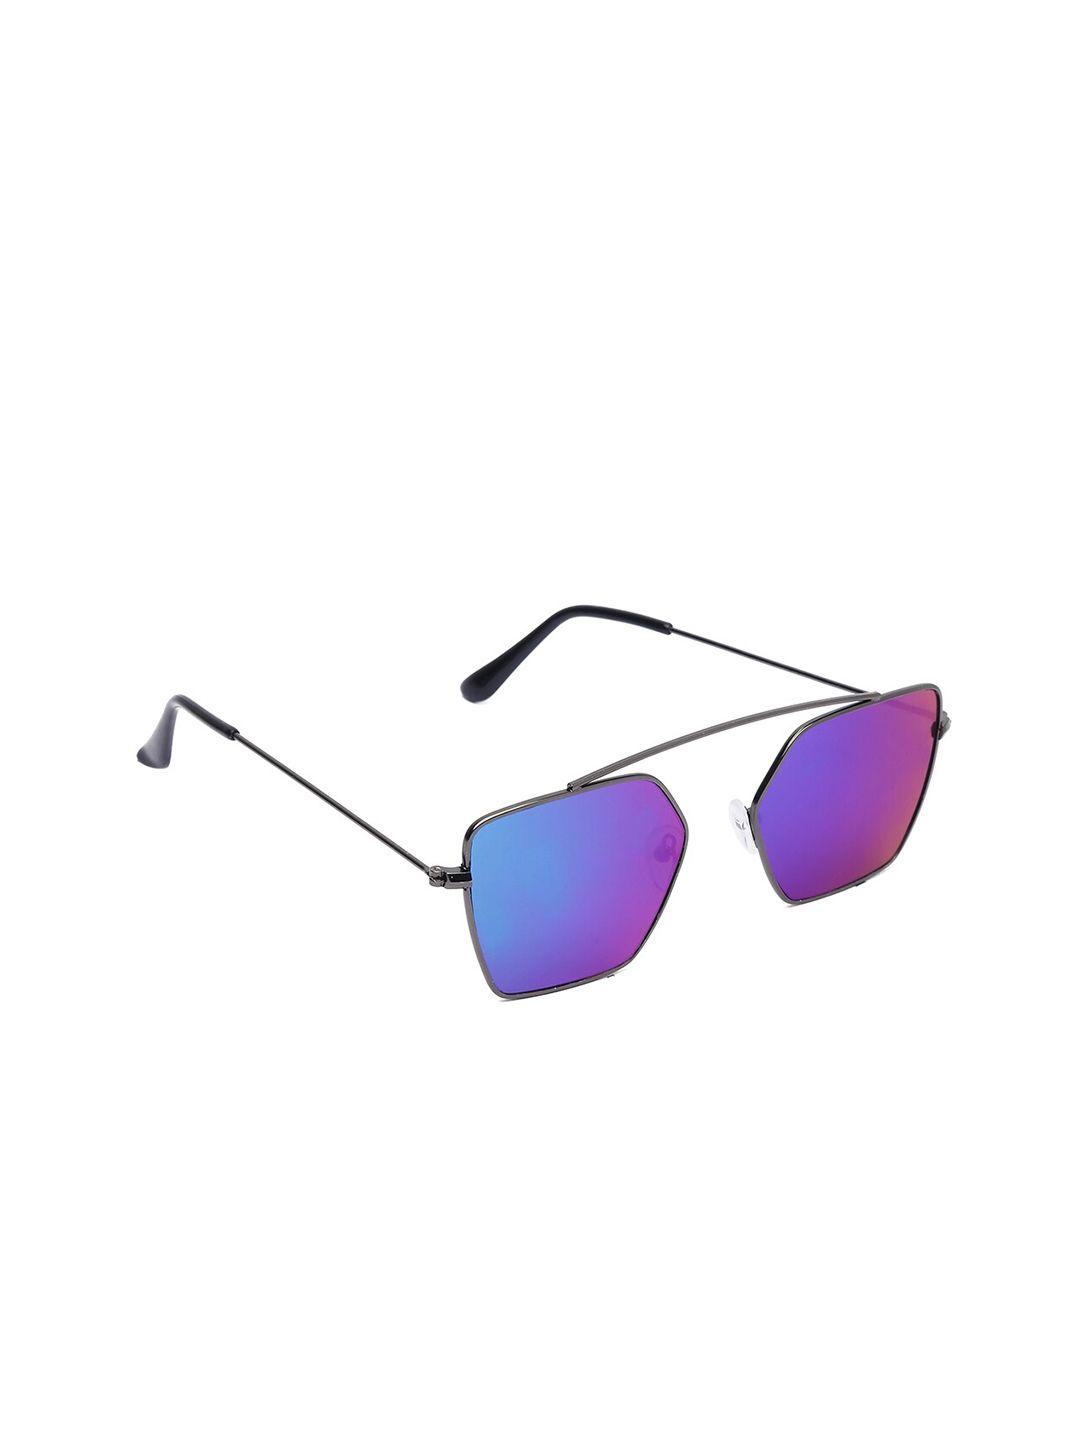 swiss design unisex mirrored lens & gunmetal-toned other sunglasses with uv protected lens